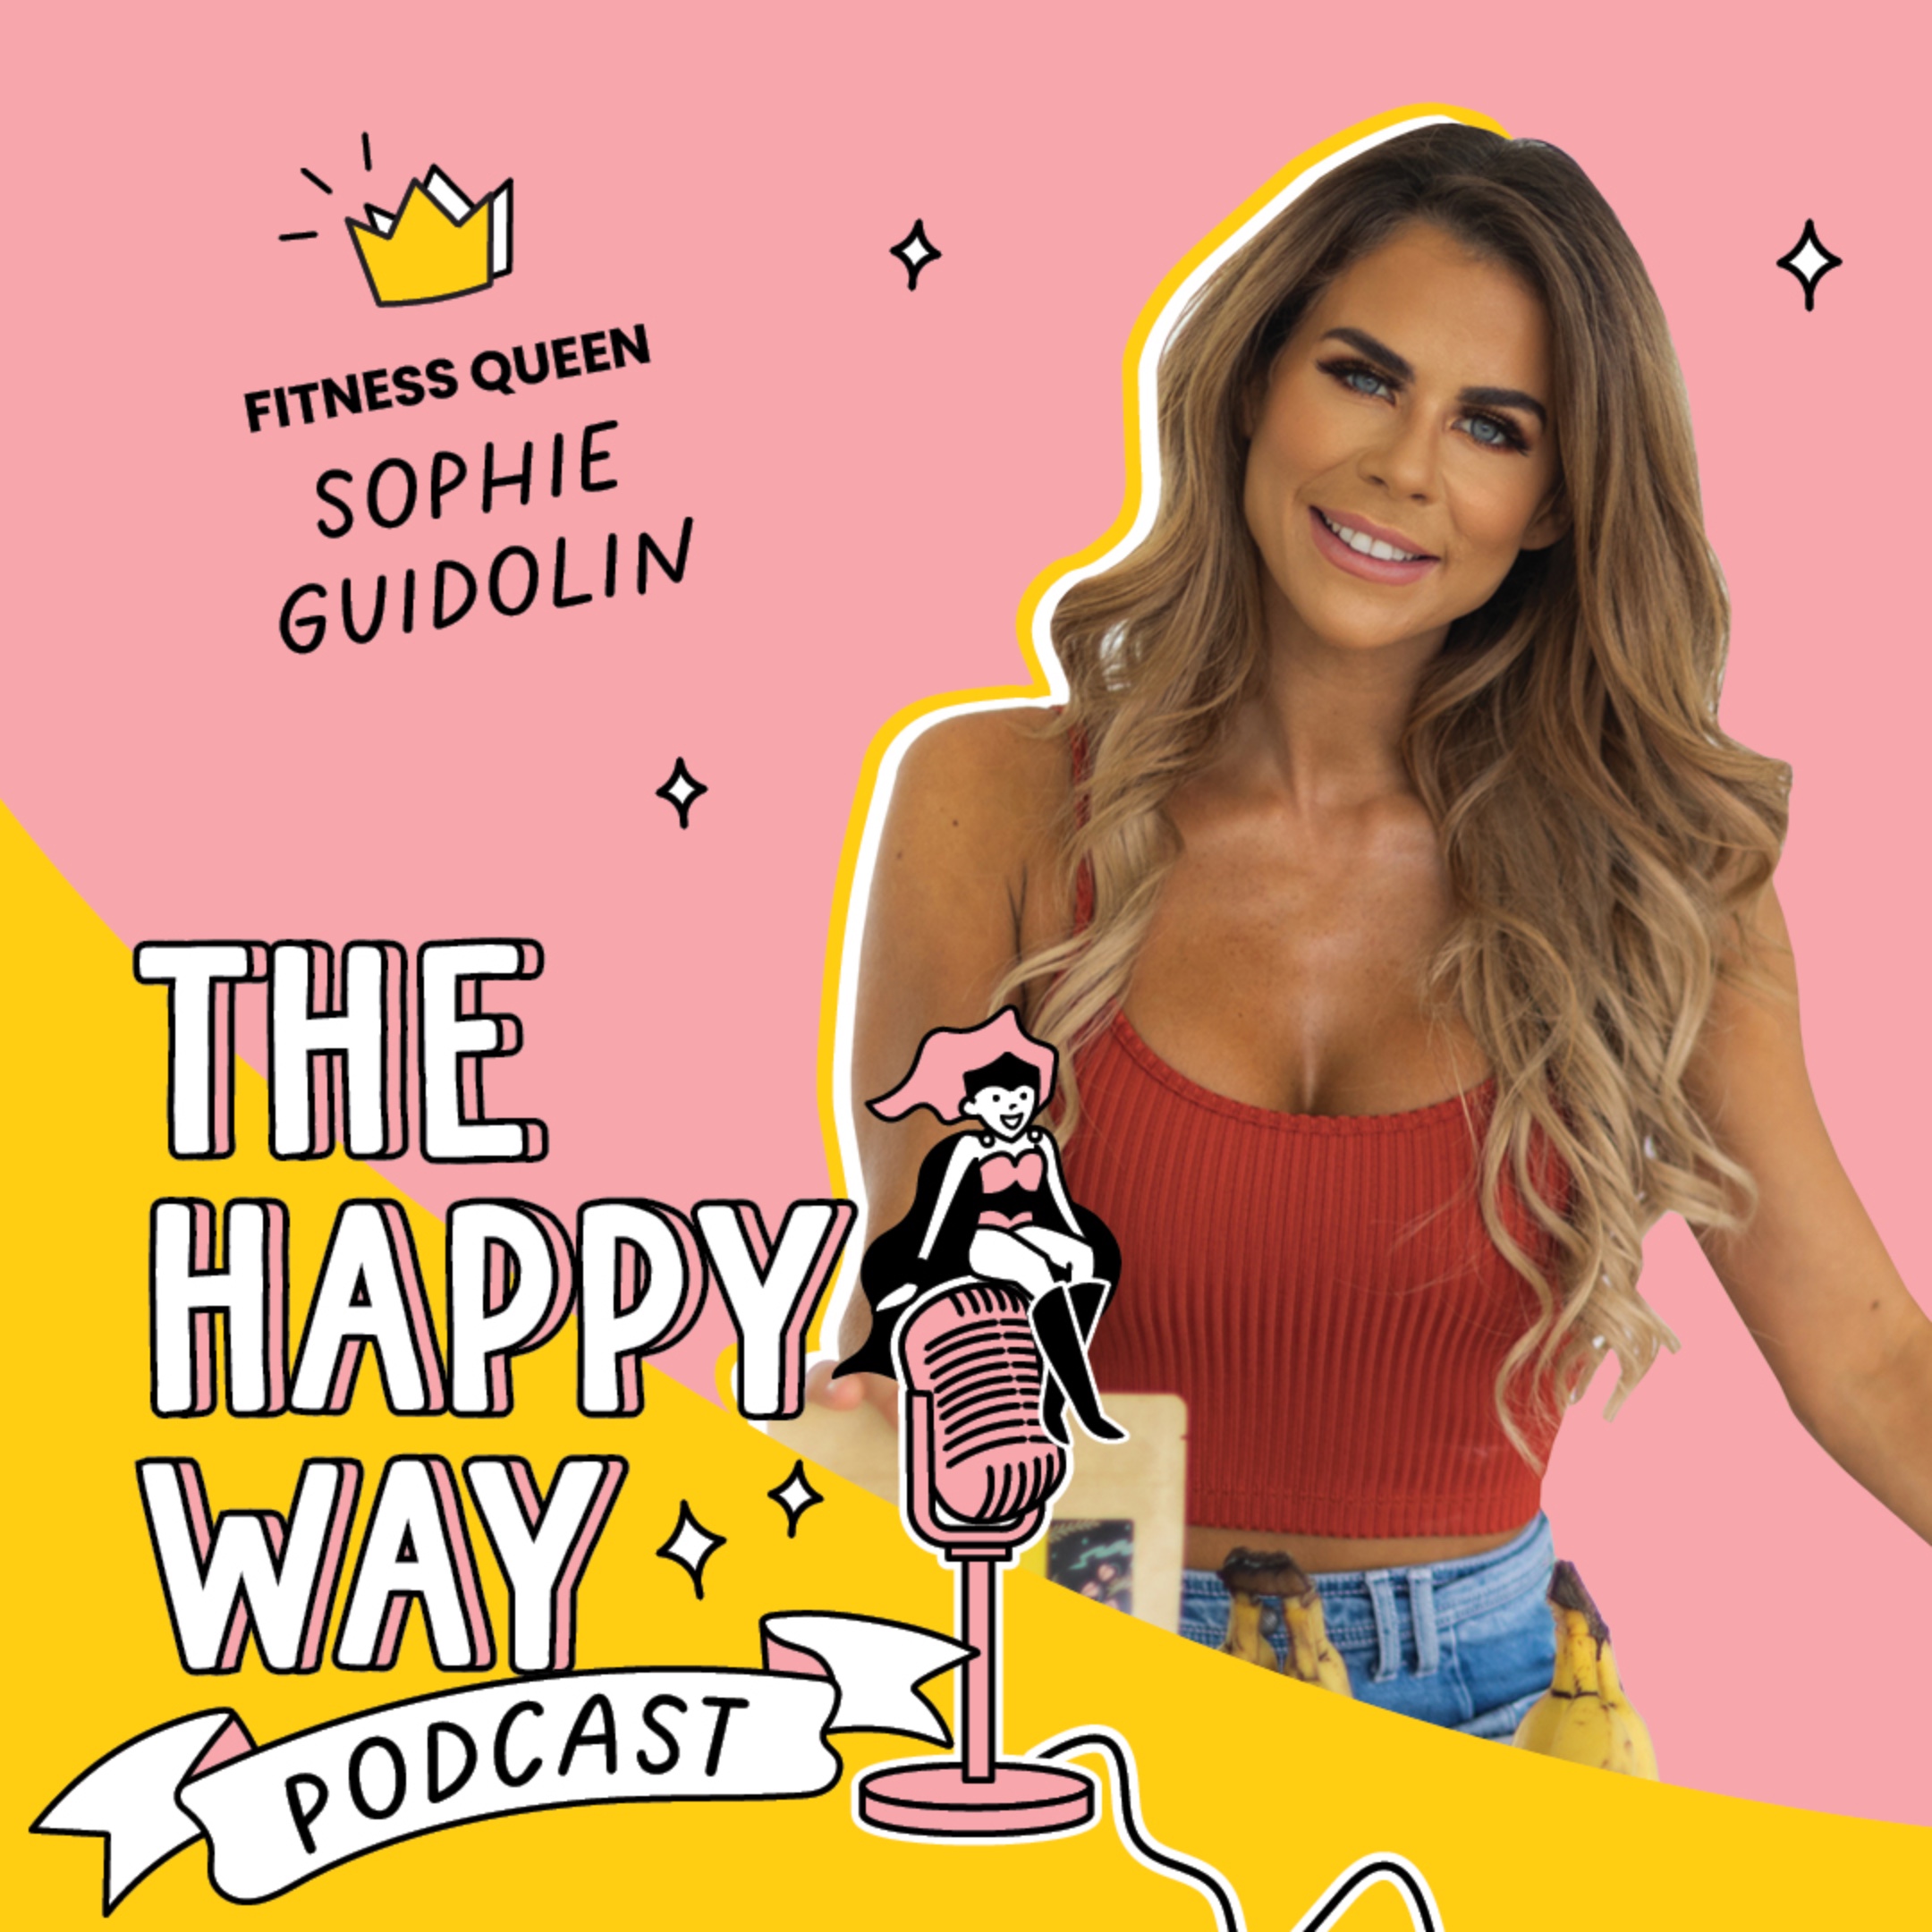 Sophie Guidolin – How to manifest a fulfilling 2022 and be your BEST!